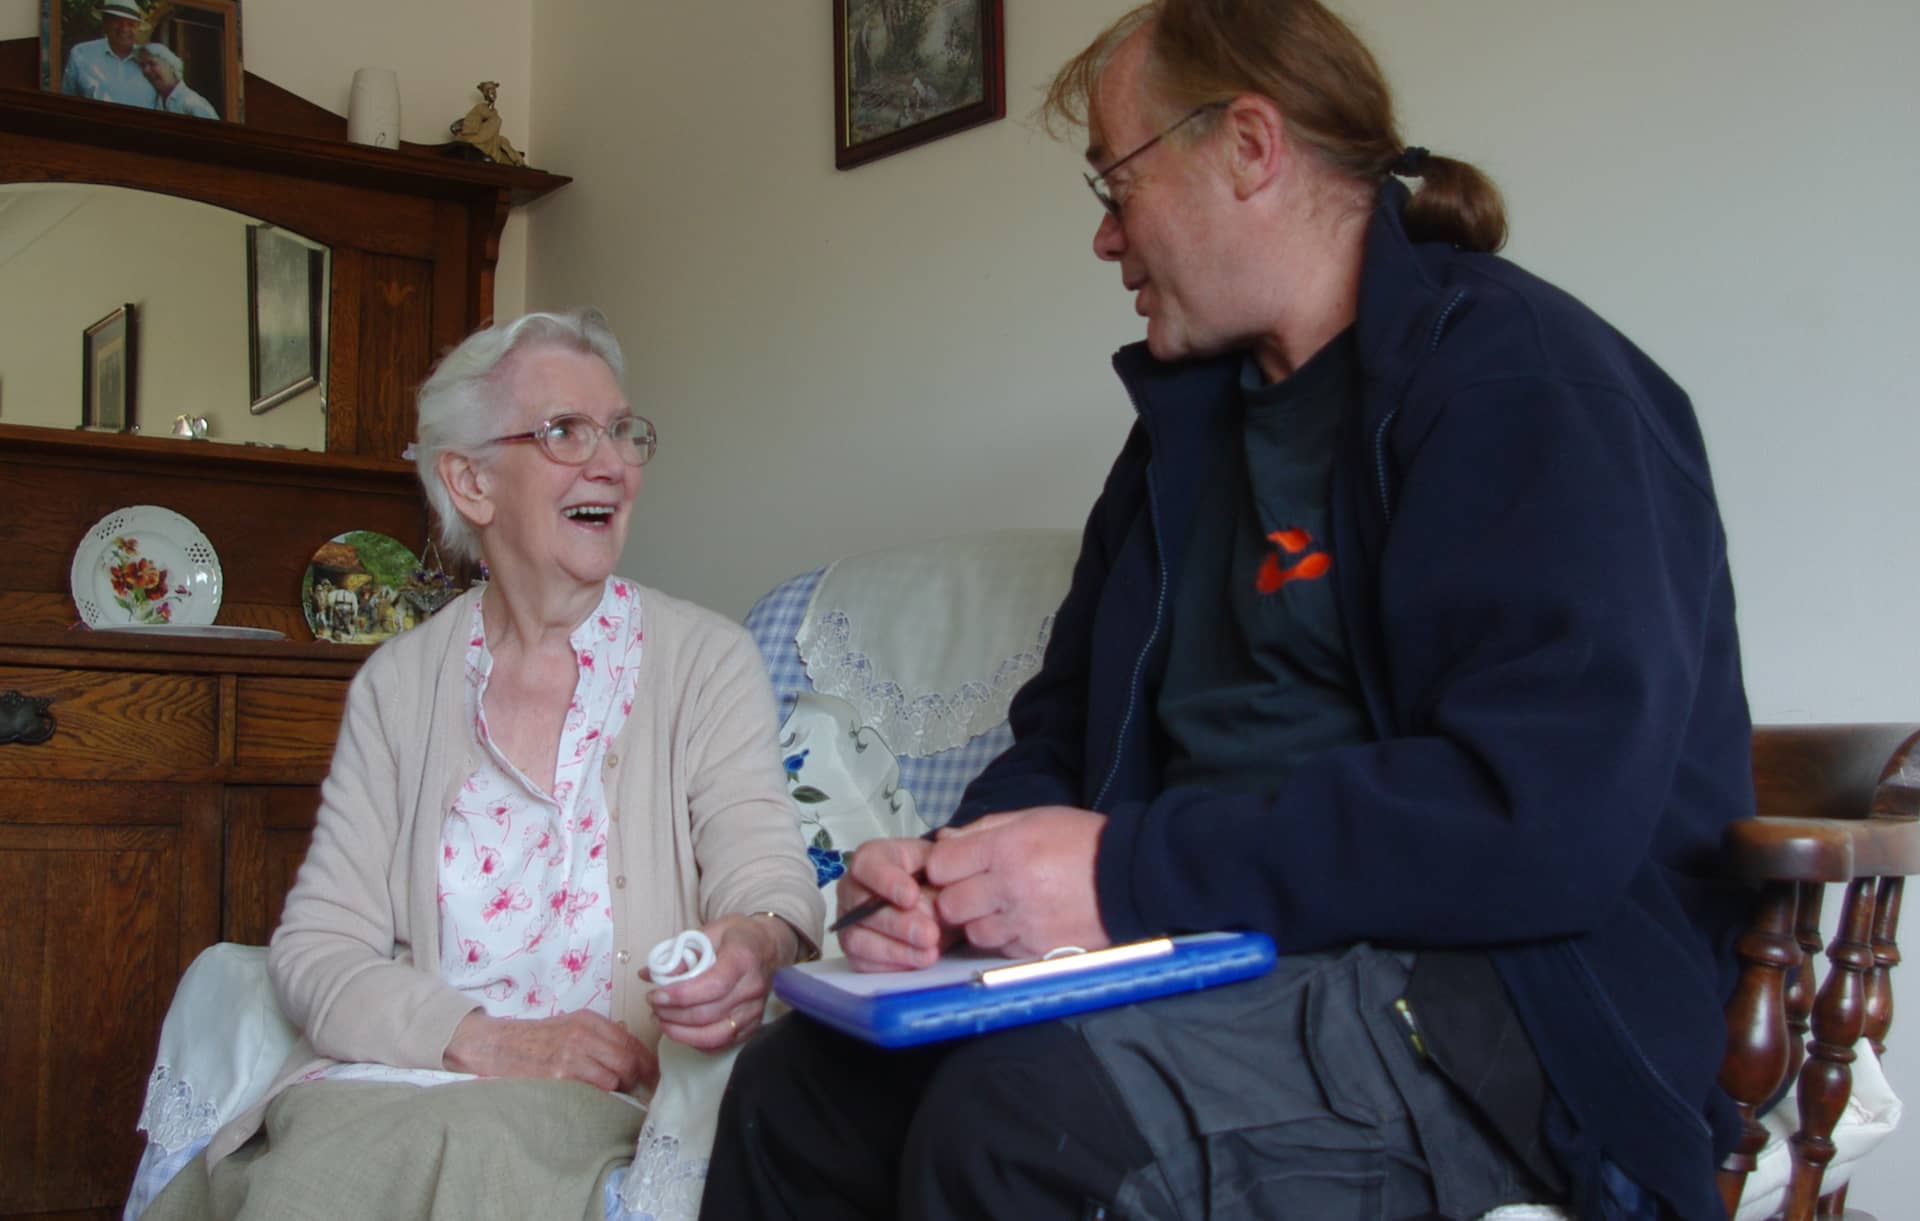 Ray from The Footprint Trust with an older Resident